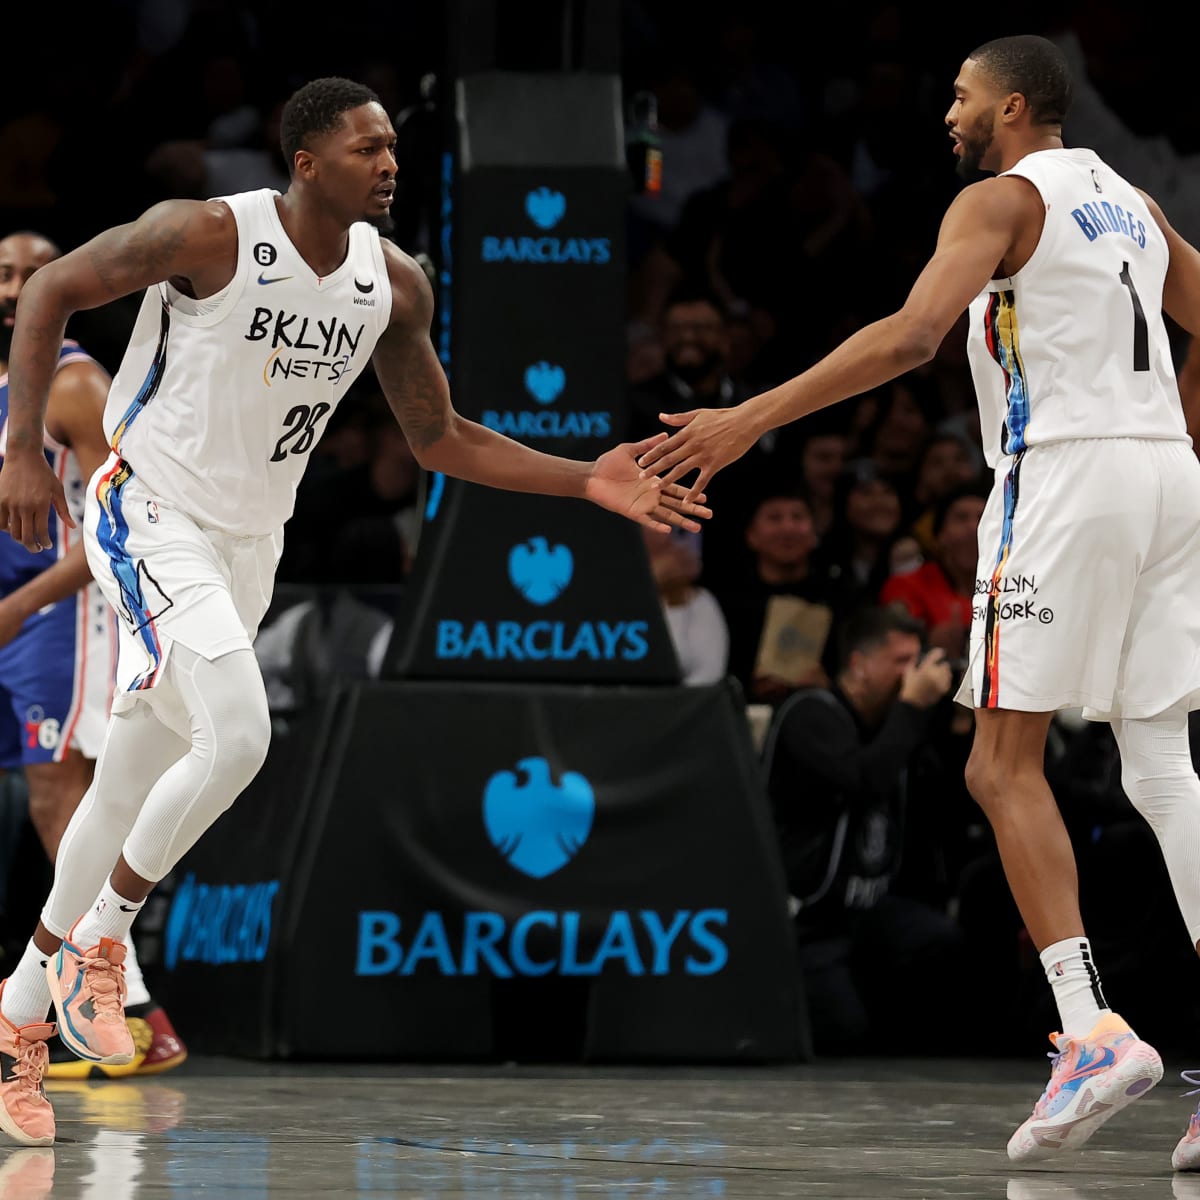 Mikal Bridges, new-look Nets making the switch to defense - Newsday